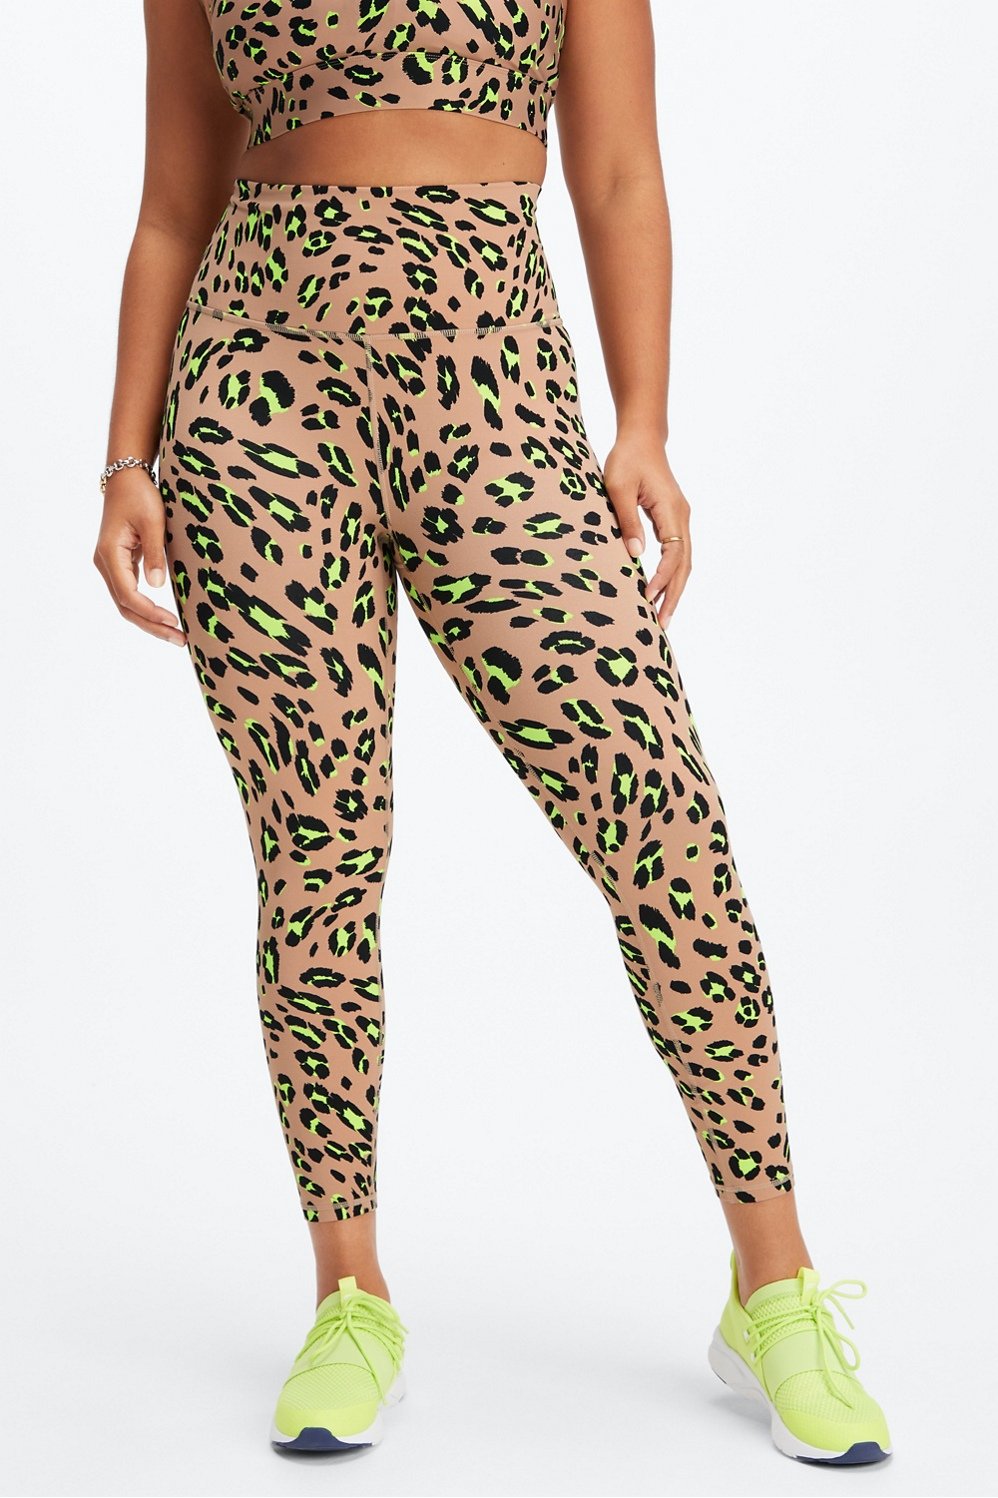 Viper Butter Legging 7 Colors Available